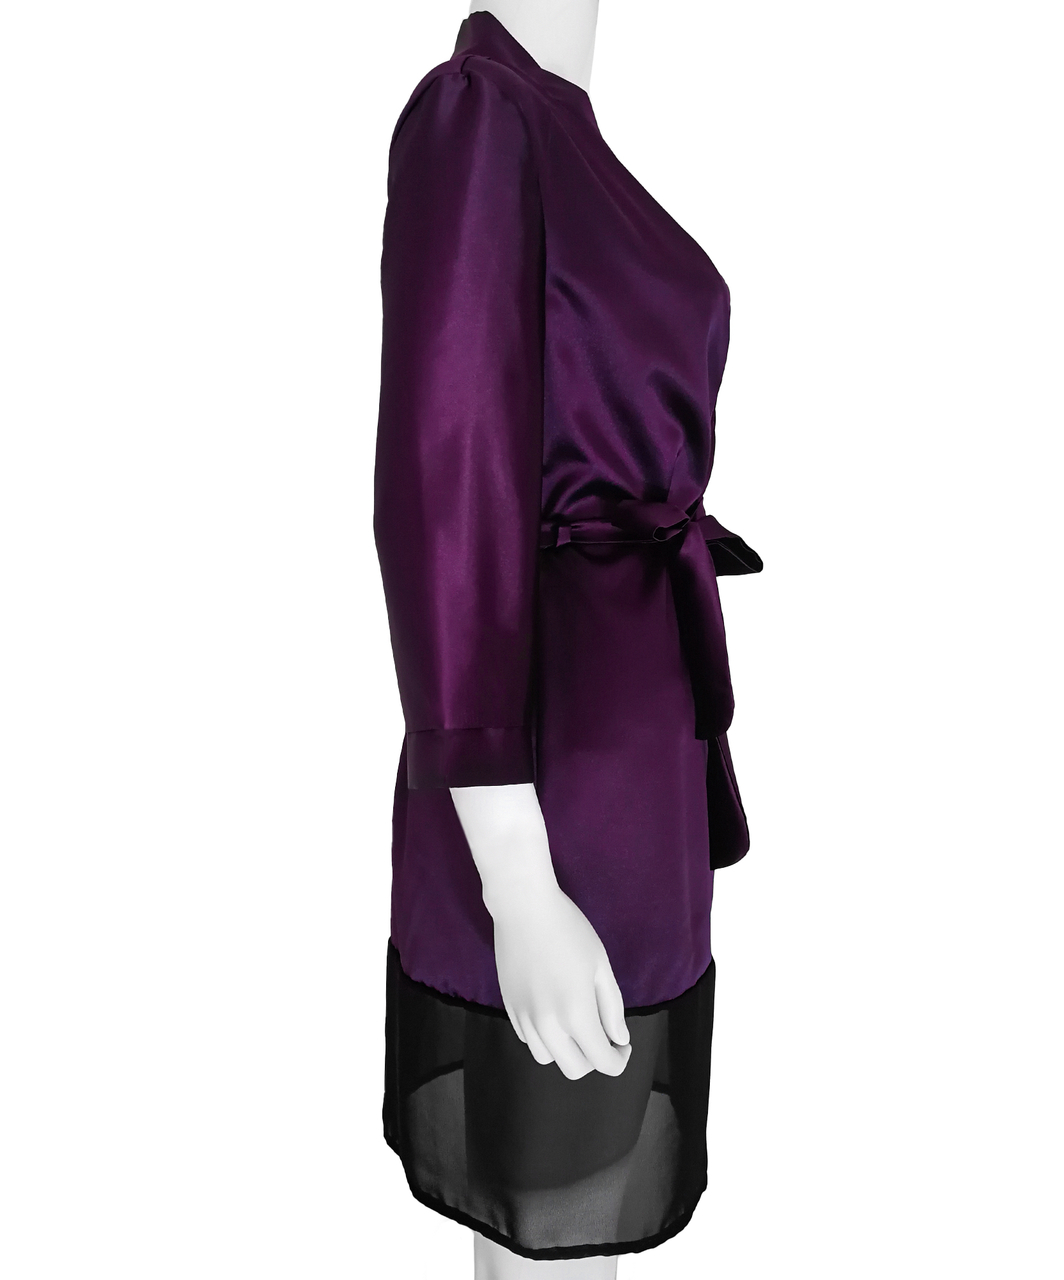 SexyStyle purple robe with black hemline